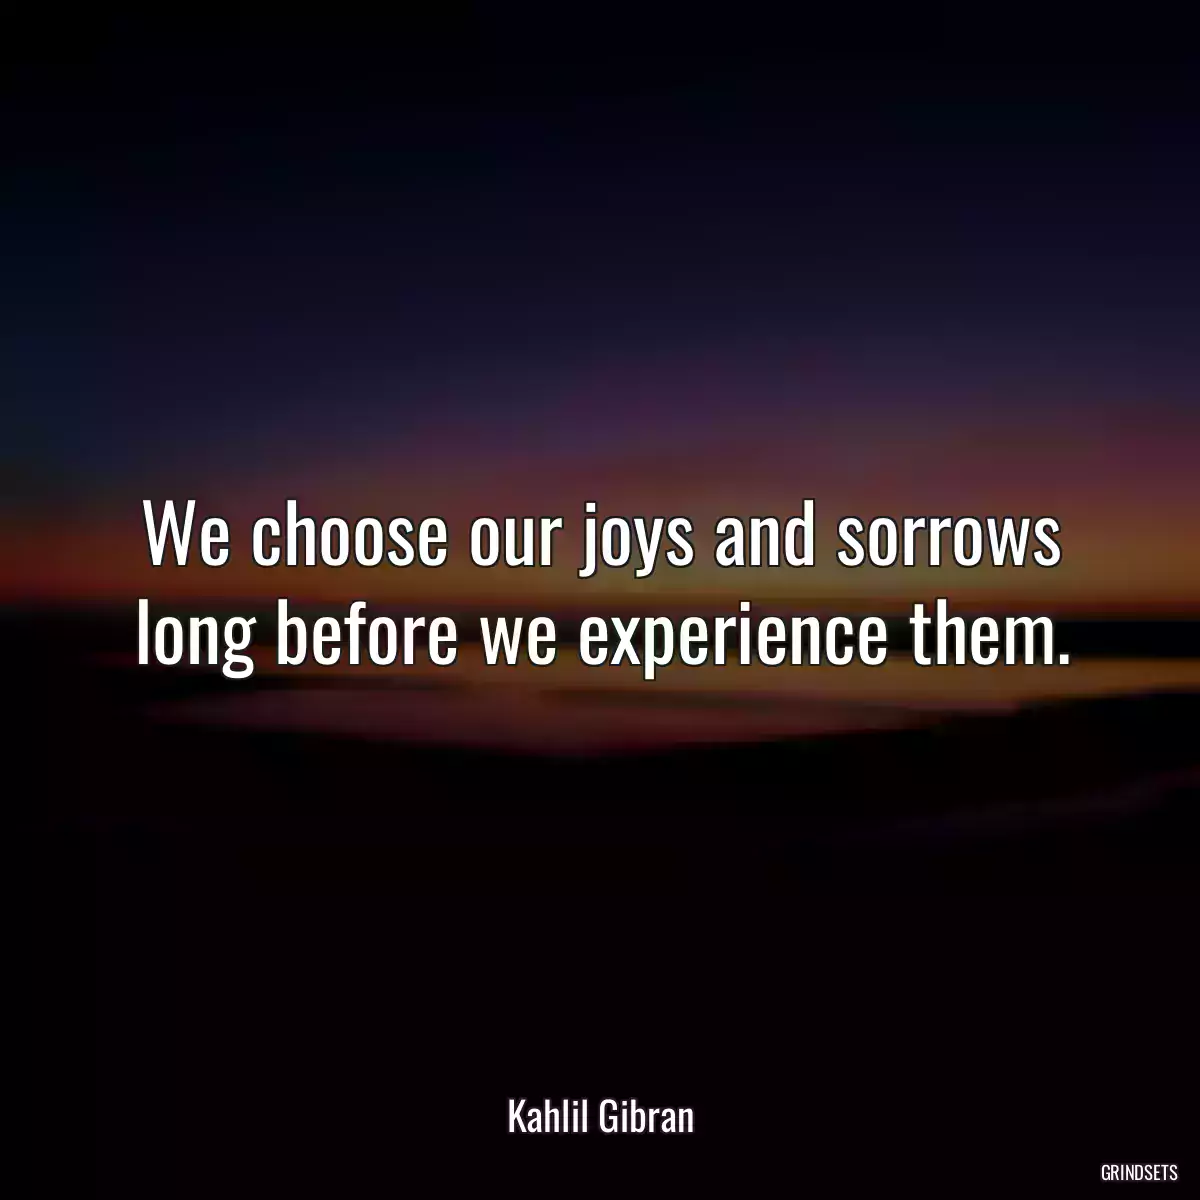 We choose our joys and sorrows long before we experience them.